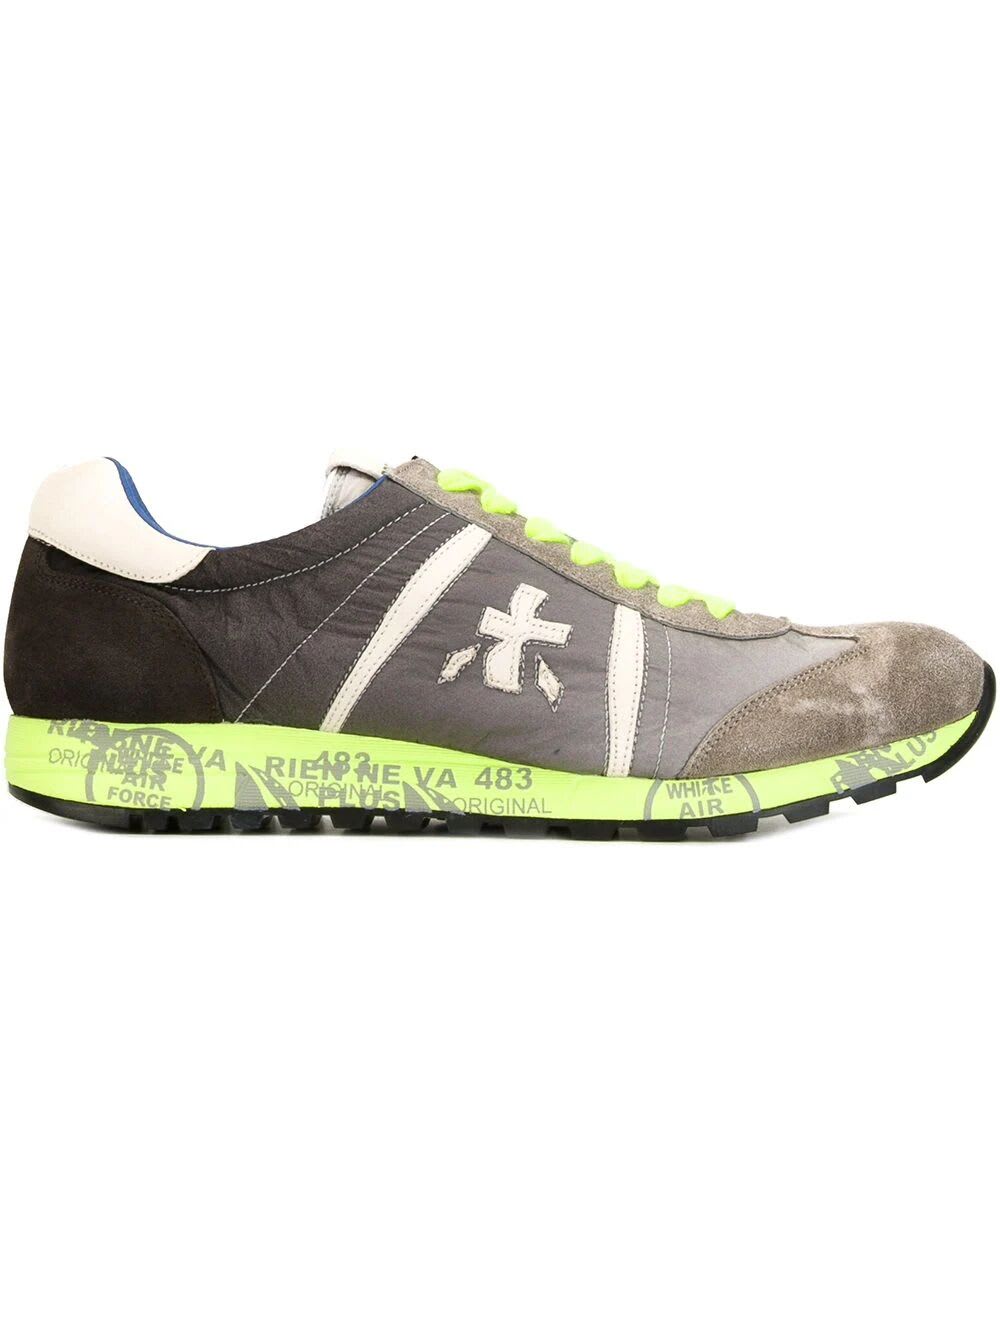 Shop Premiata Lucy Sneakers In Grey Yellow